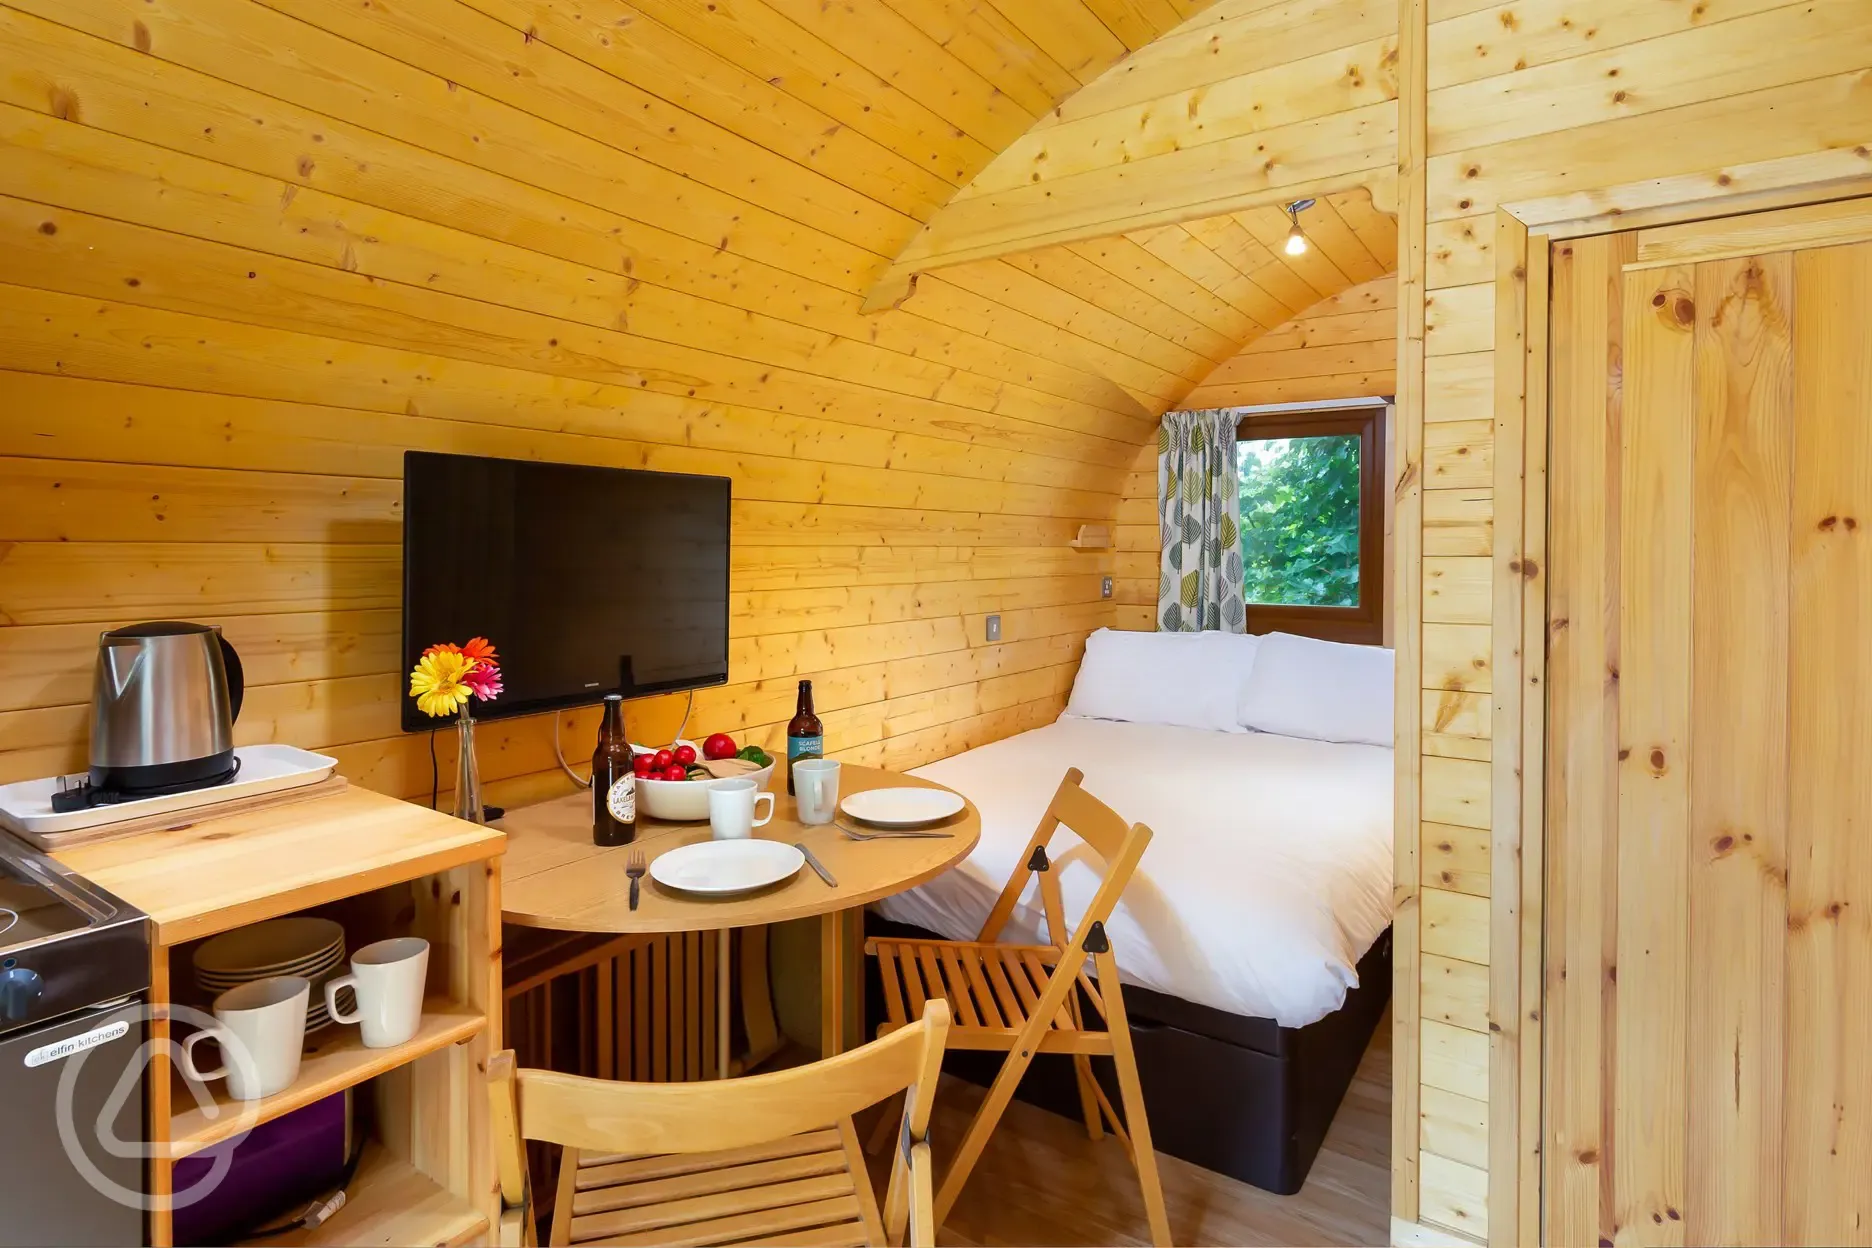 Super Deluxe Glamping Pod